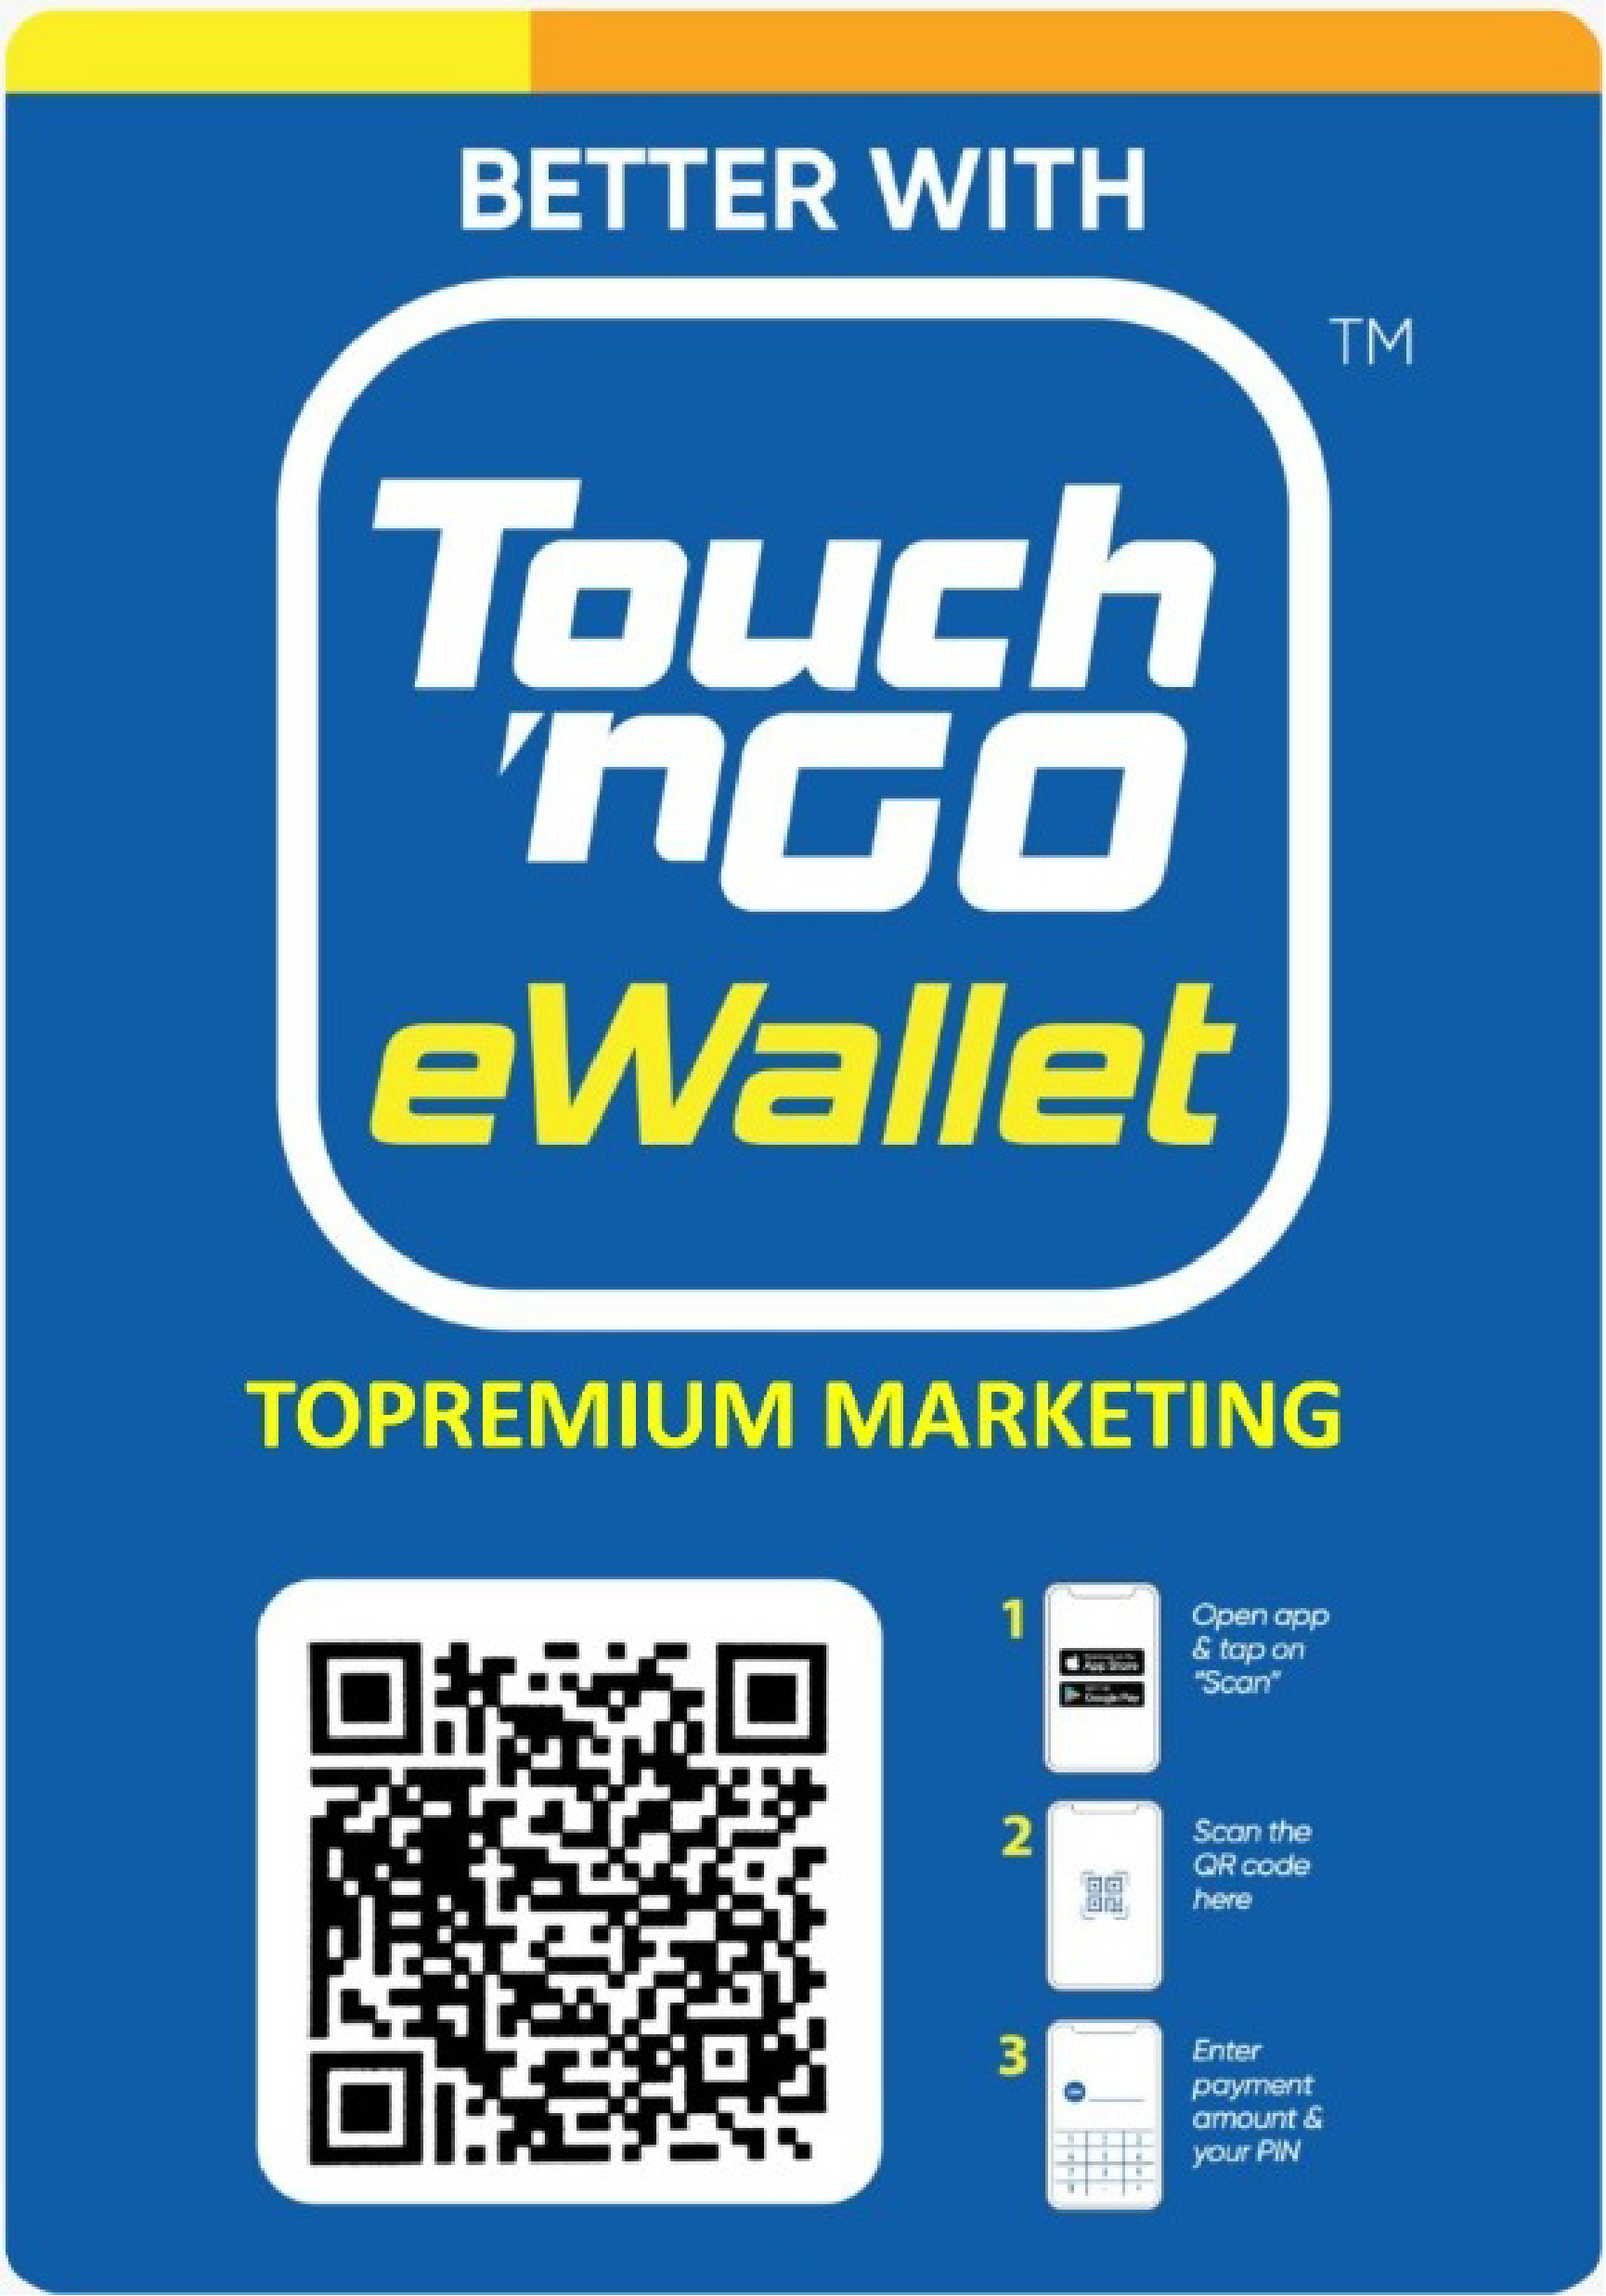 How to terminate touch n go ewallet